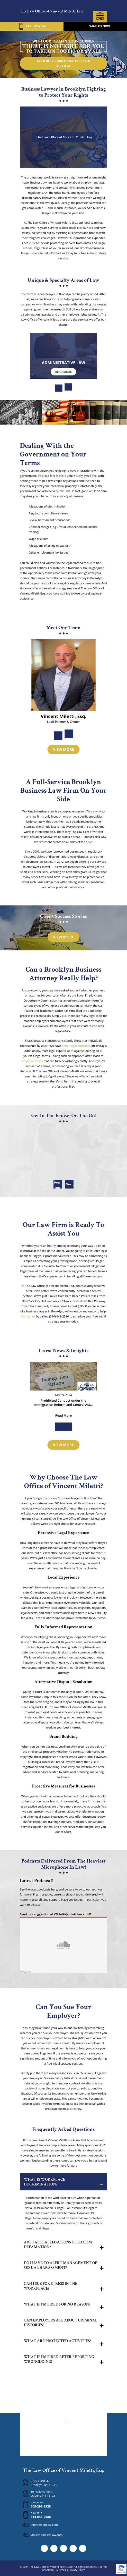 The Law Office of Vincent Miletti Esq - Brooklyn NY Lawyers